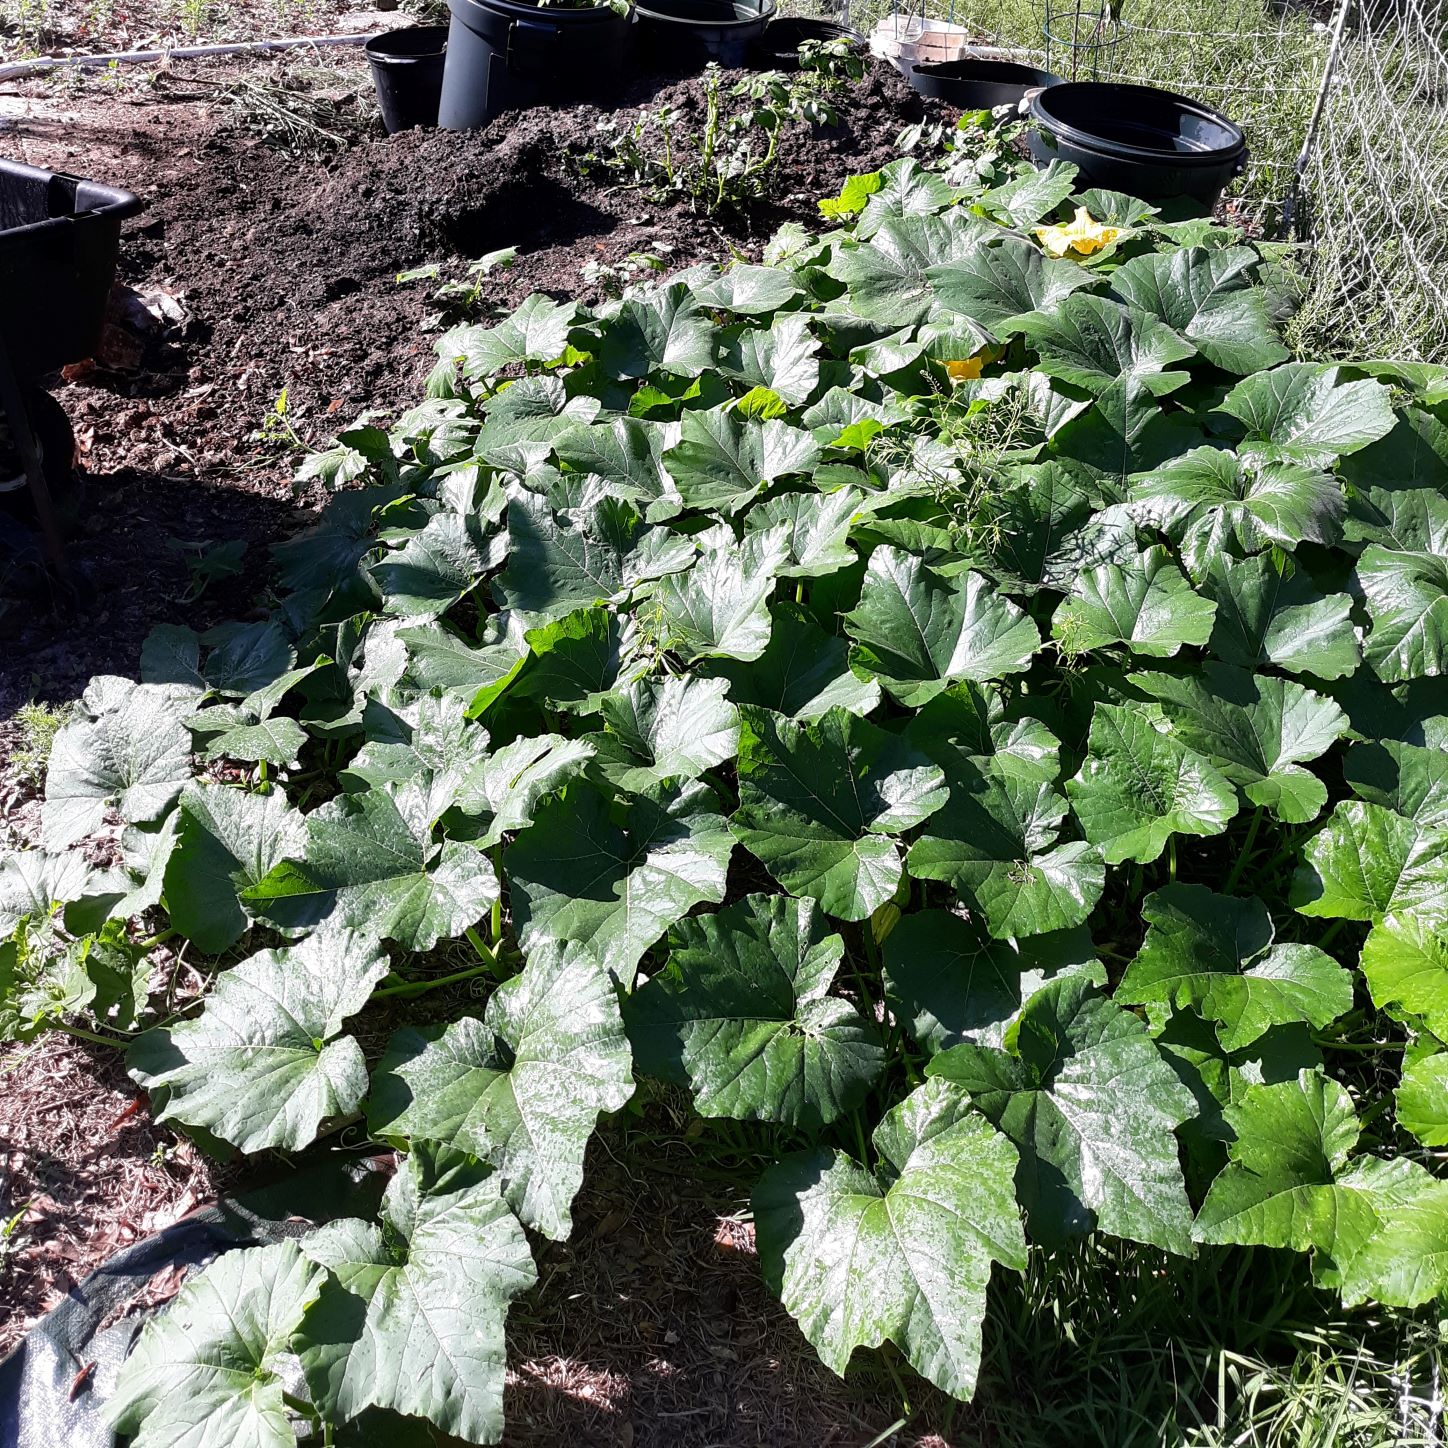 the squash plants have spread out from the compost heap and are shading the grass in the chicken yard